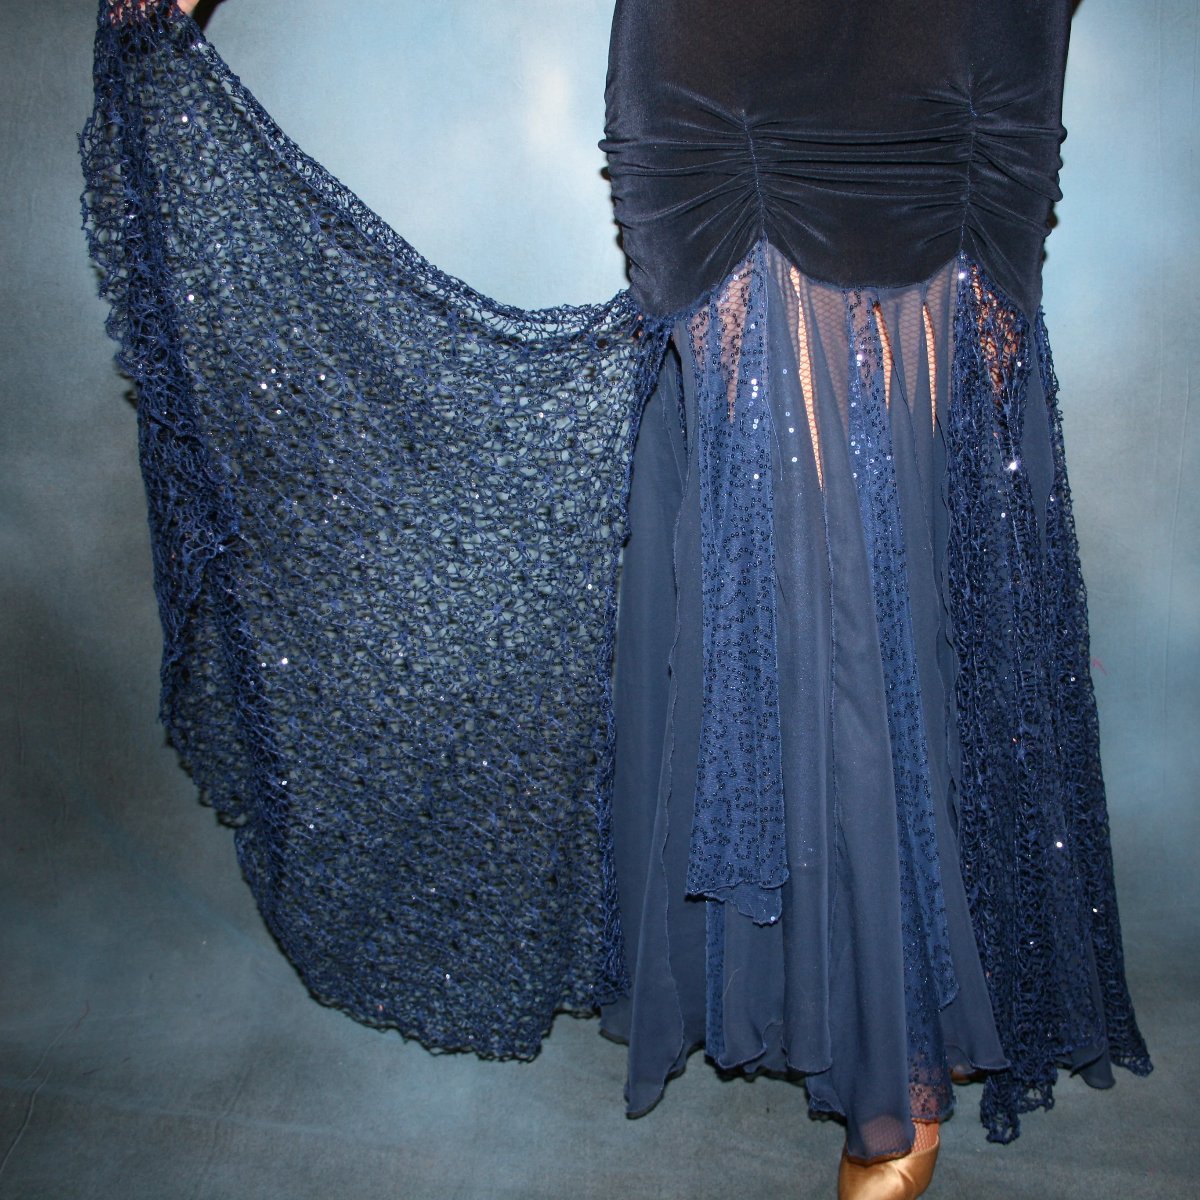 Crystal's Creations lower view of Ballroom dress created in luxurious navy blue solid slinky fabric with yards of gorgeous unique sequined mermaid net look lace & chiffon. The bottom of base of dress has ruching at the hip. A great social dress for any ballroom dance or special occasion, as well as a great beginner show dress!